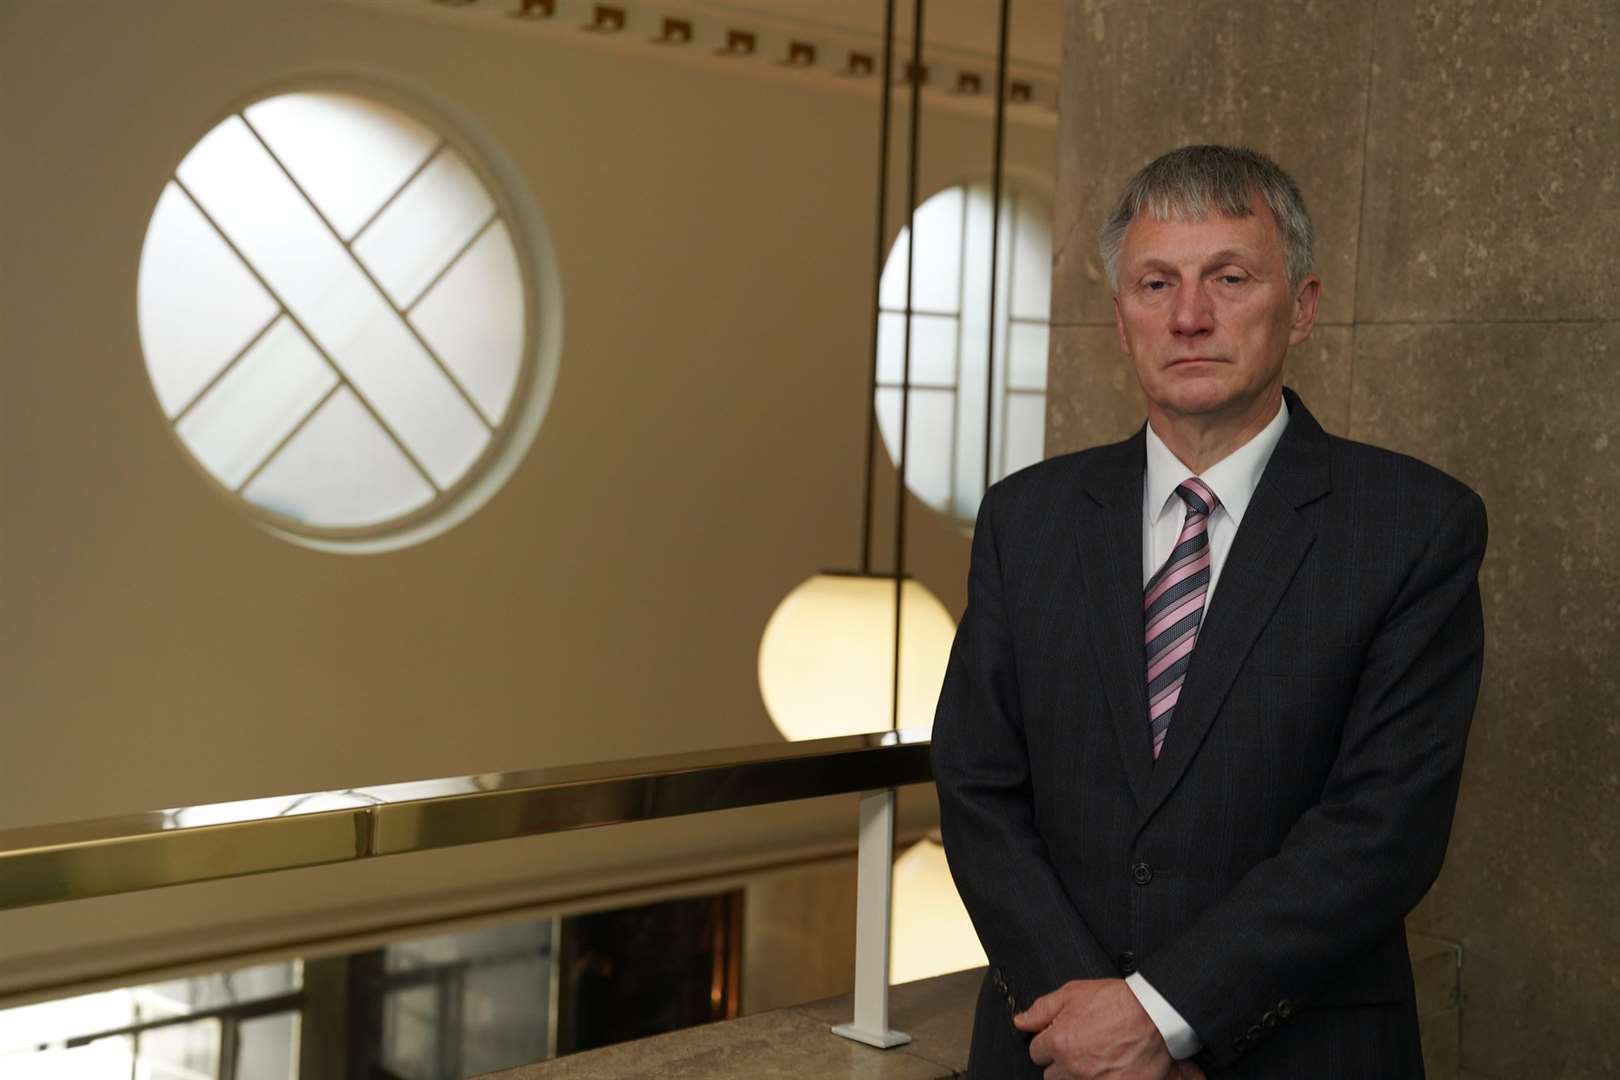 Minister for Business, Trade, Tourism and Enterprise, Ivan McKee